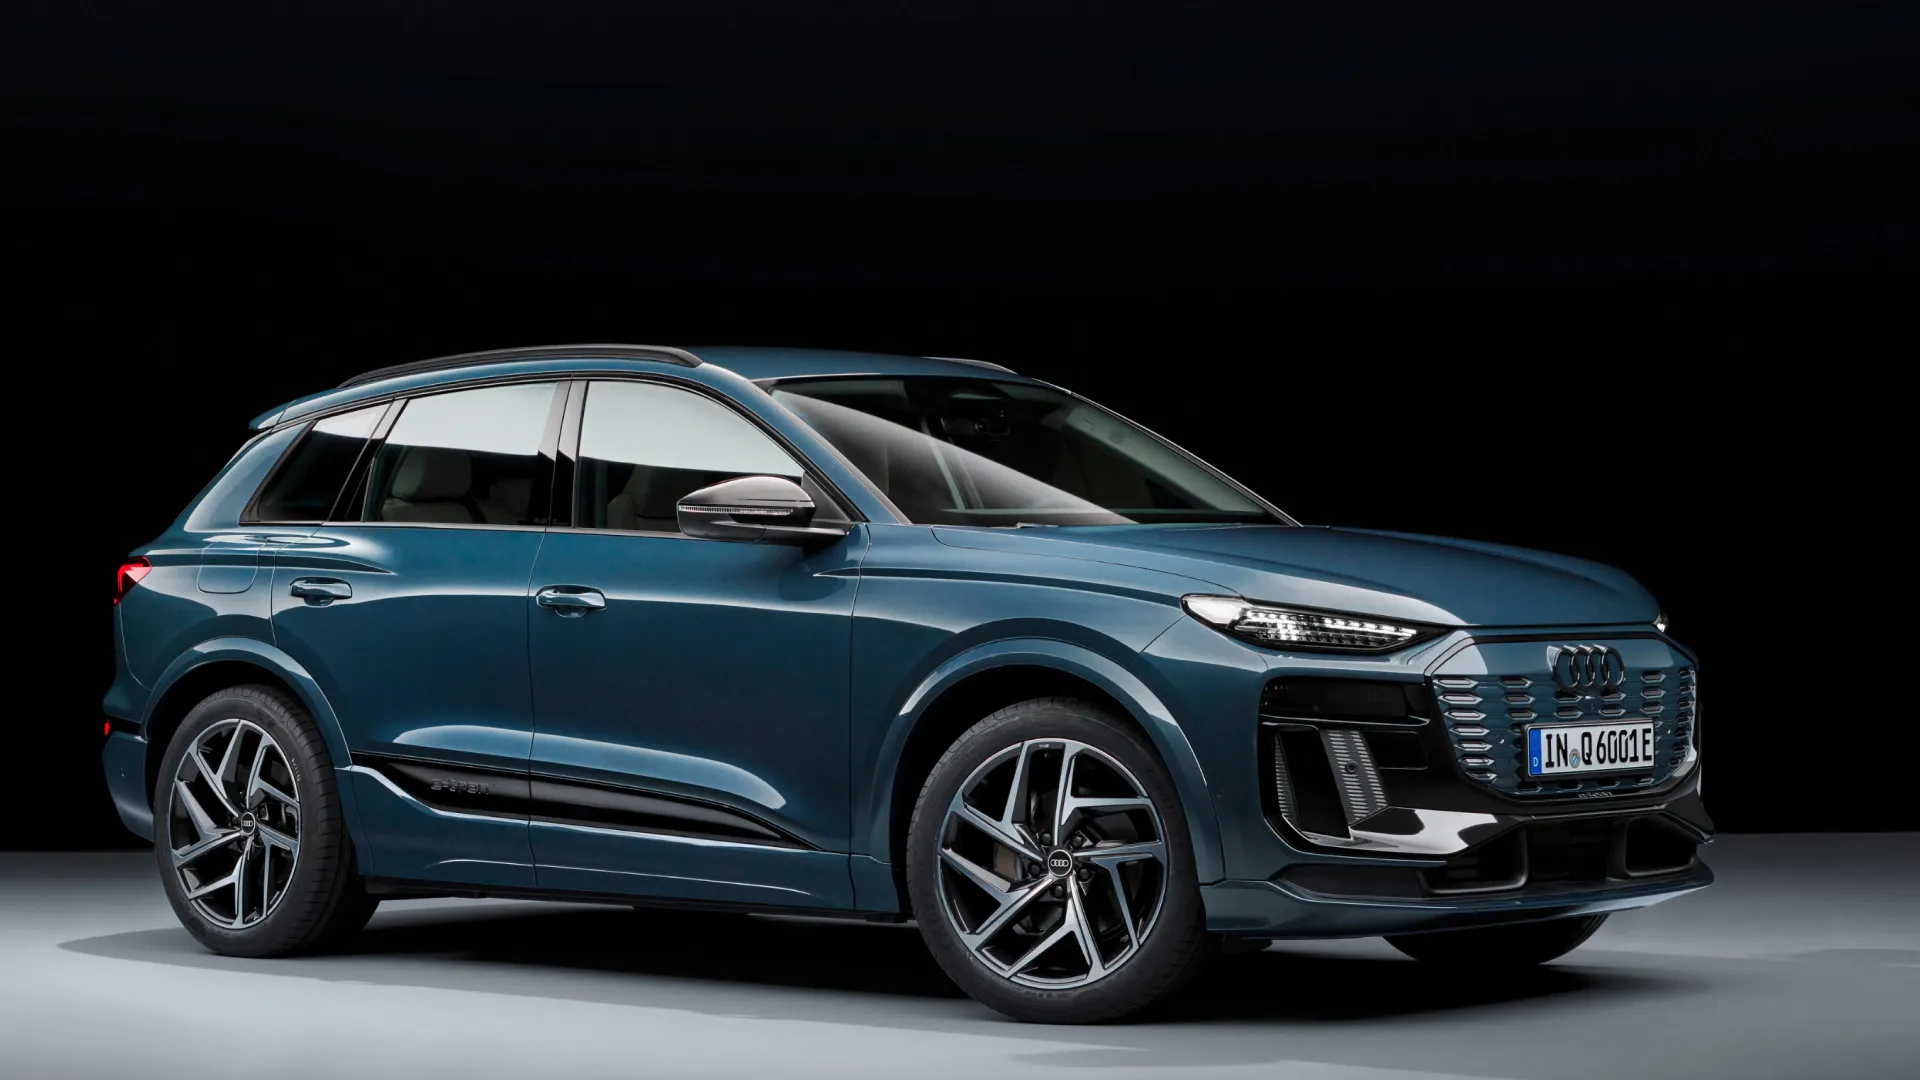 Side view of the new Audi Q6 e-tron.